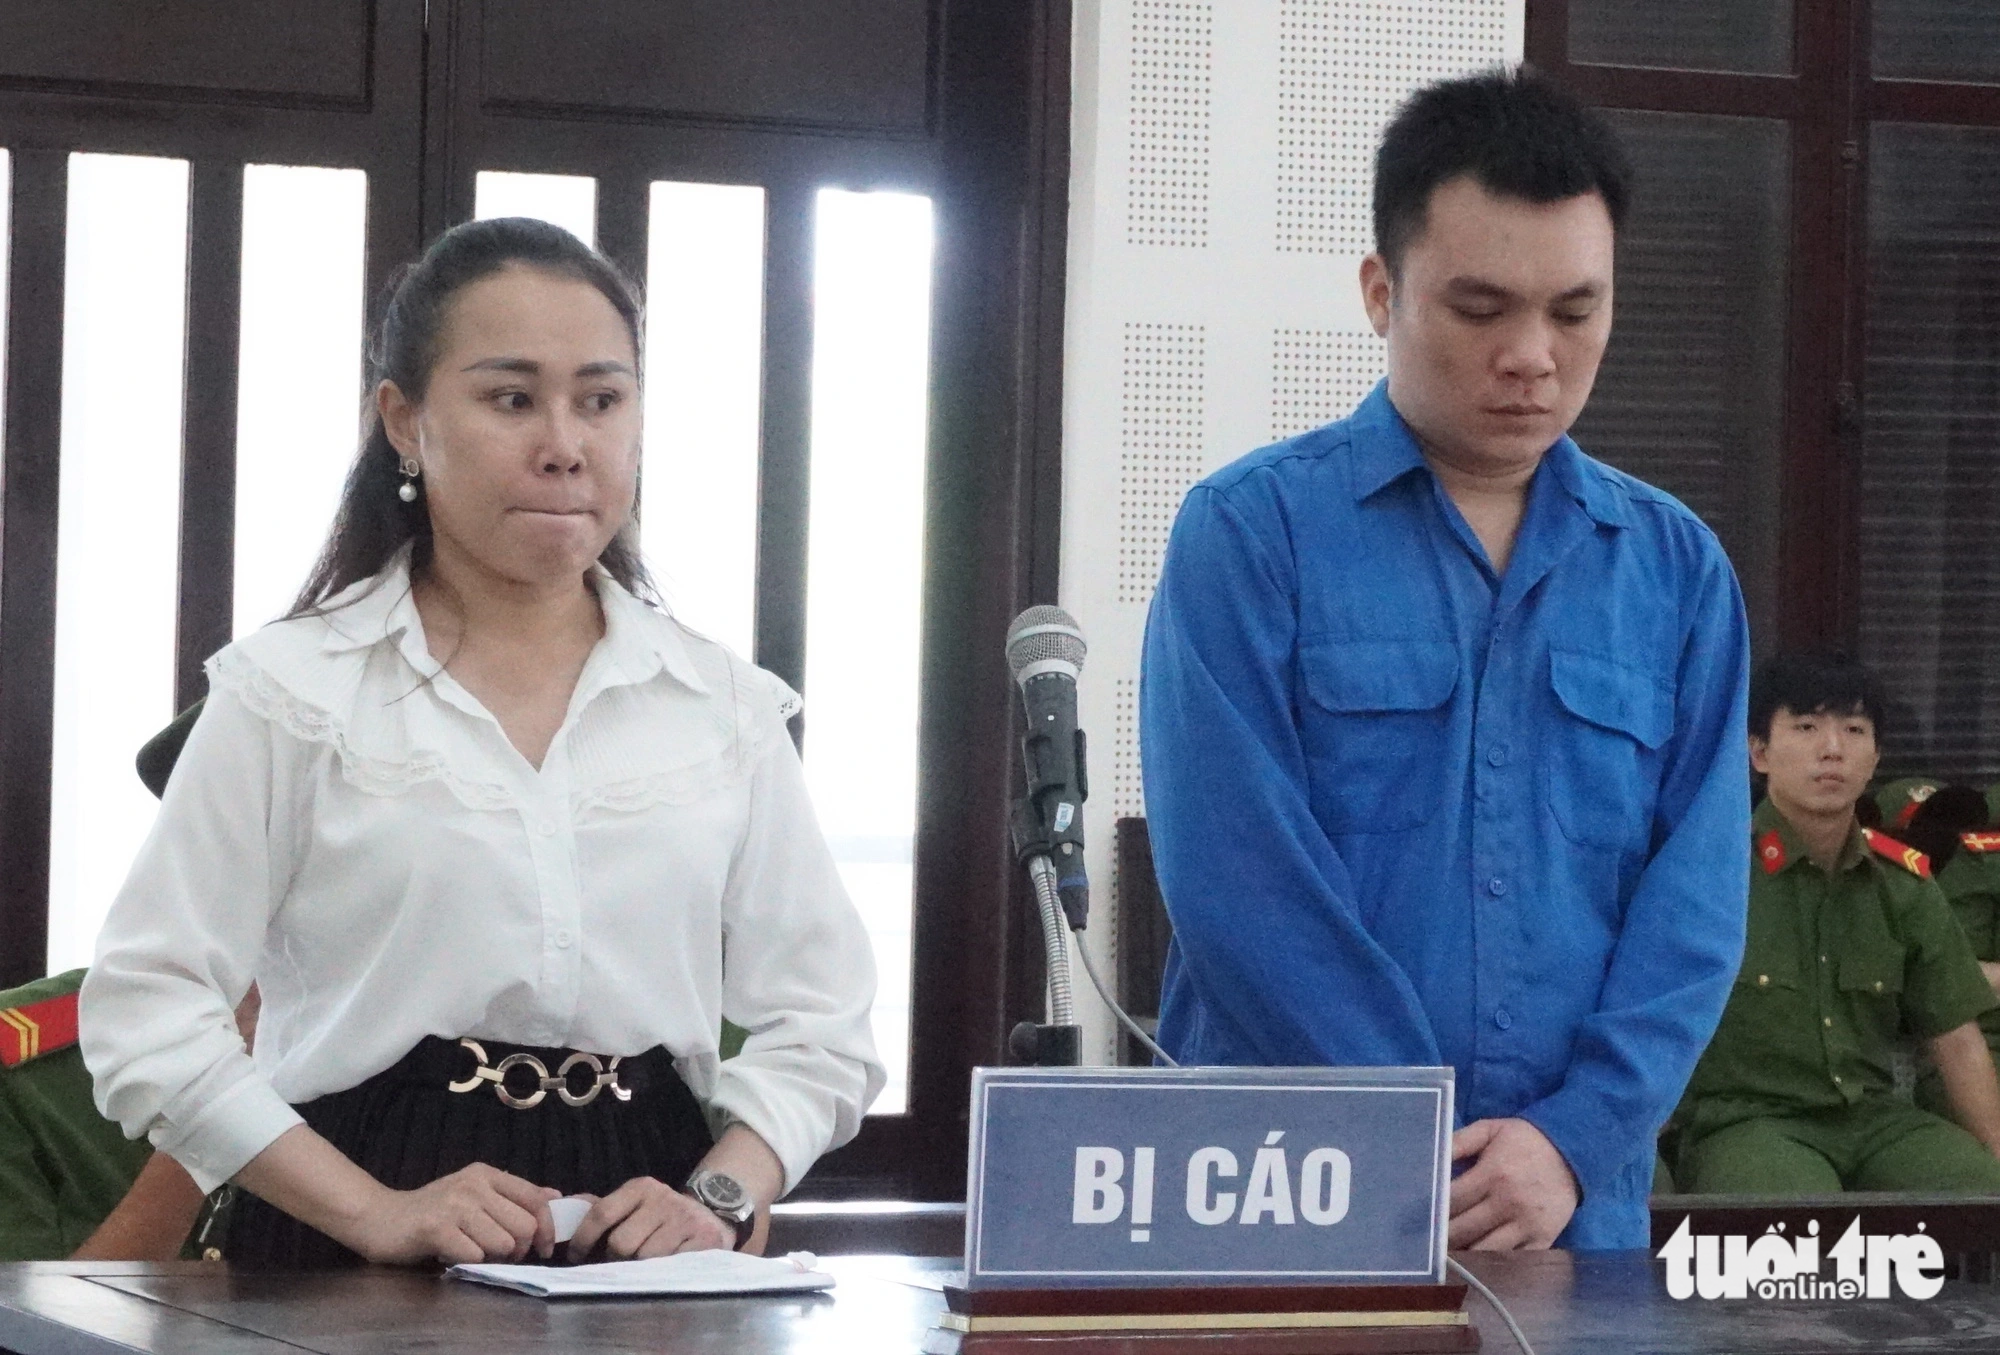 Da Nang food delivery man escapes prosecution after unknowingly transporting hidden drugs